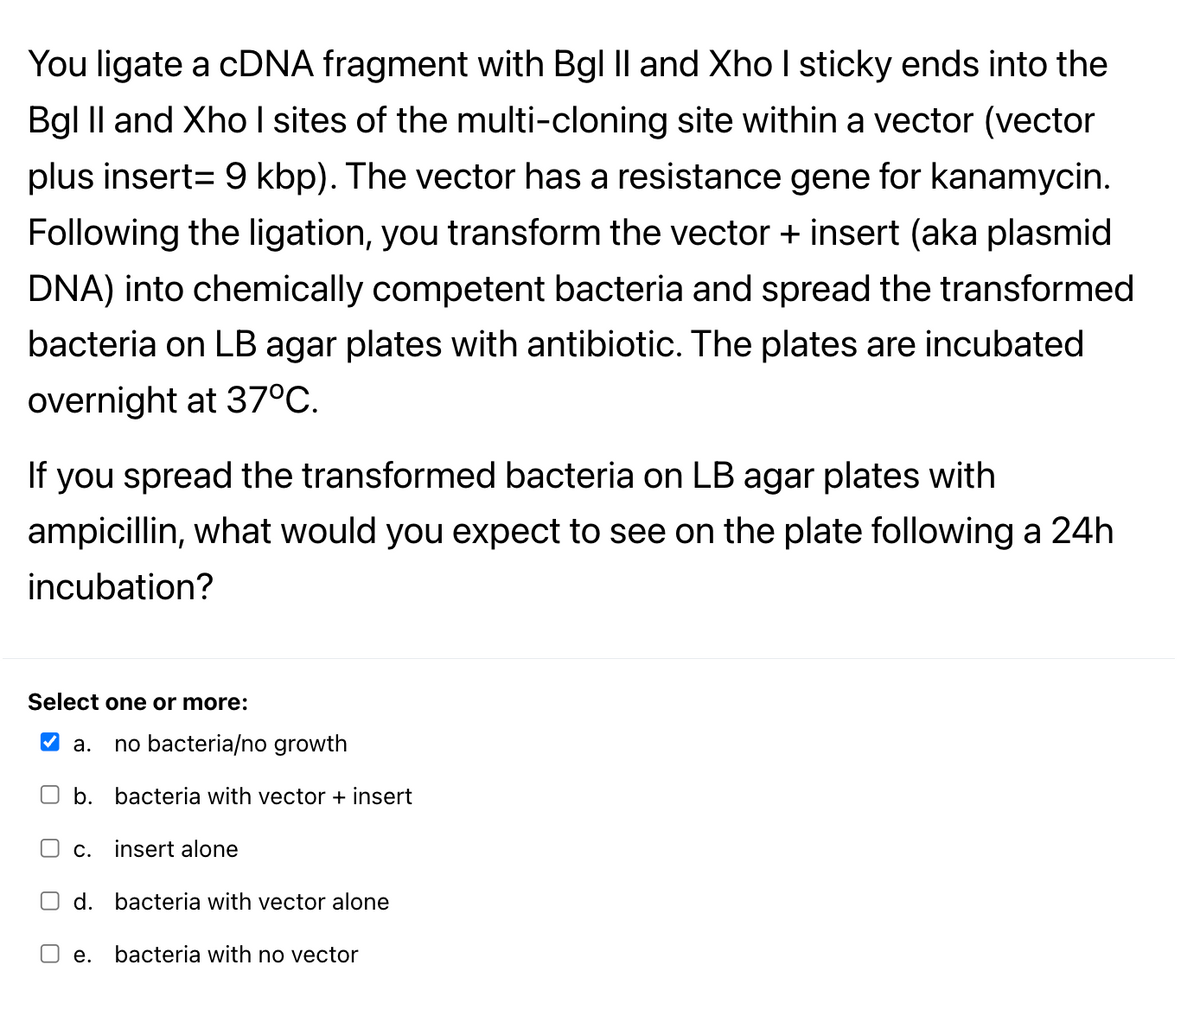 You ligate a CDNA fragment with Bgl Il and Xho I sticky ends into the
Bgl Il and Xho I sites of the multi-cloning site within a vector (vector
plus insert= 9 kbp). The vector has a resistance gene for kanamycin.
Following the ligation, you transform the vector + insert (aka plasmid
DNA) into chemically competent bacteria and spread the transformed
bacteria on LB agar plates with antibiotic. The plates are incubated
overnight at 37°C.
If you spread the transformed bacteria on LB agar plates with
ampicillin, what would you expect to see on the plate following a 24h
incubation?
Select one or more:
V a.
no bacteria/no growth
b.
bacteria with vector + insert
O C.
insert alone
O d. bacteria with vector alone
е.
bacteria with no vector
